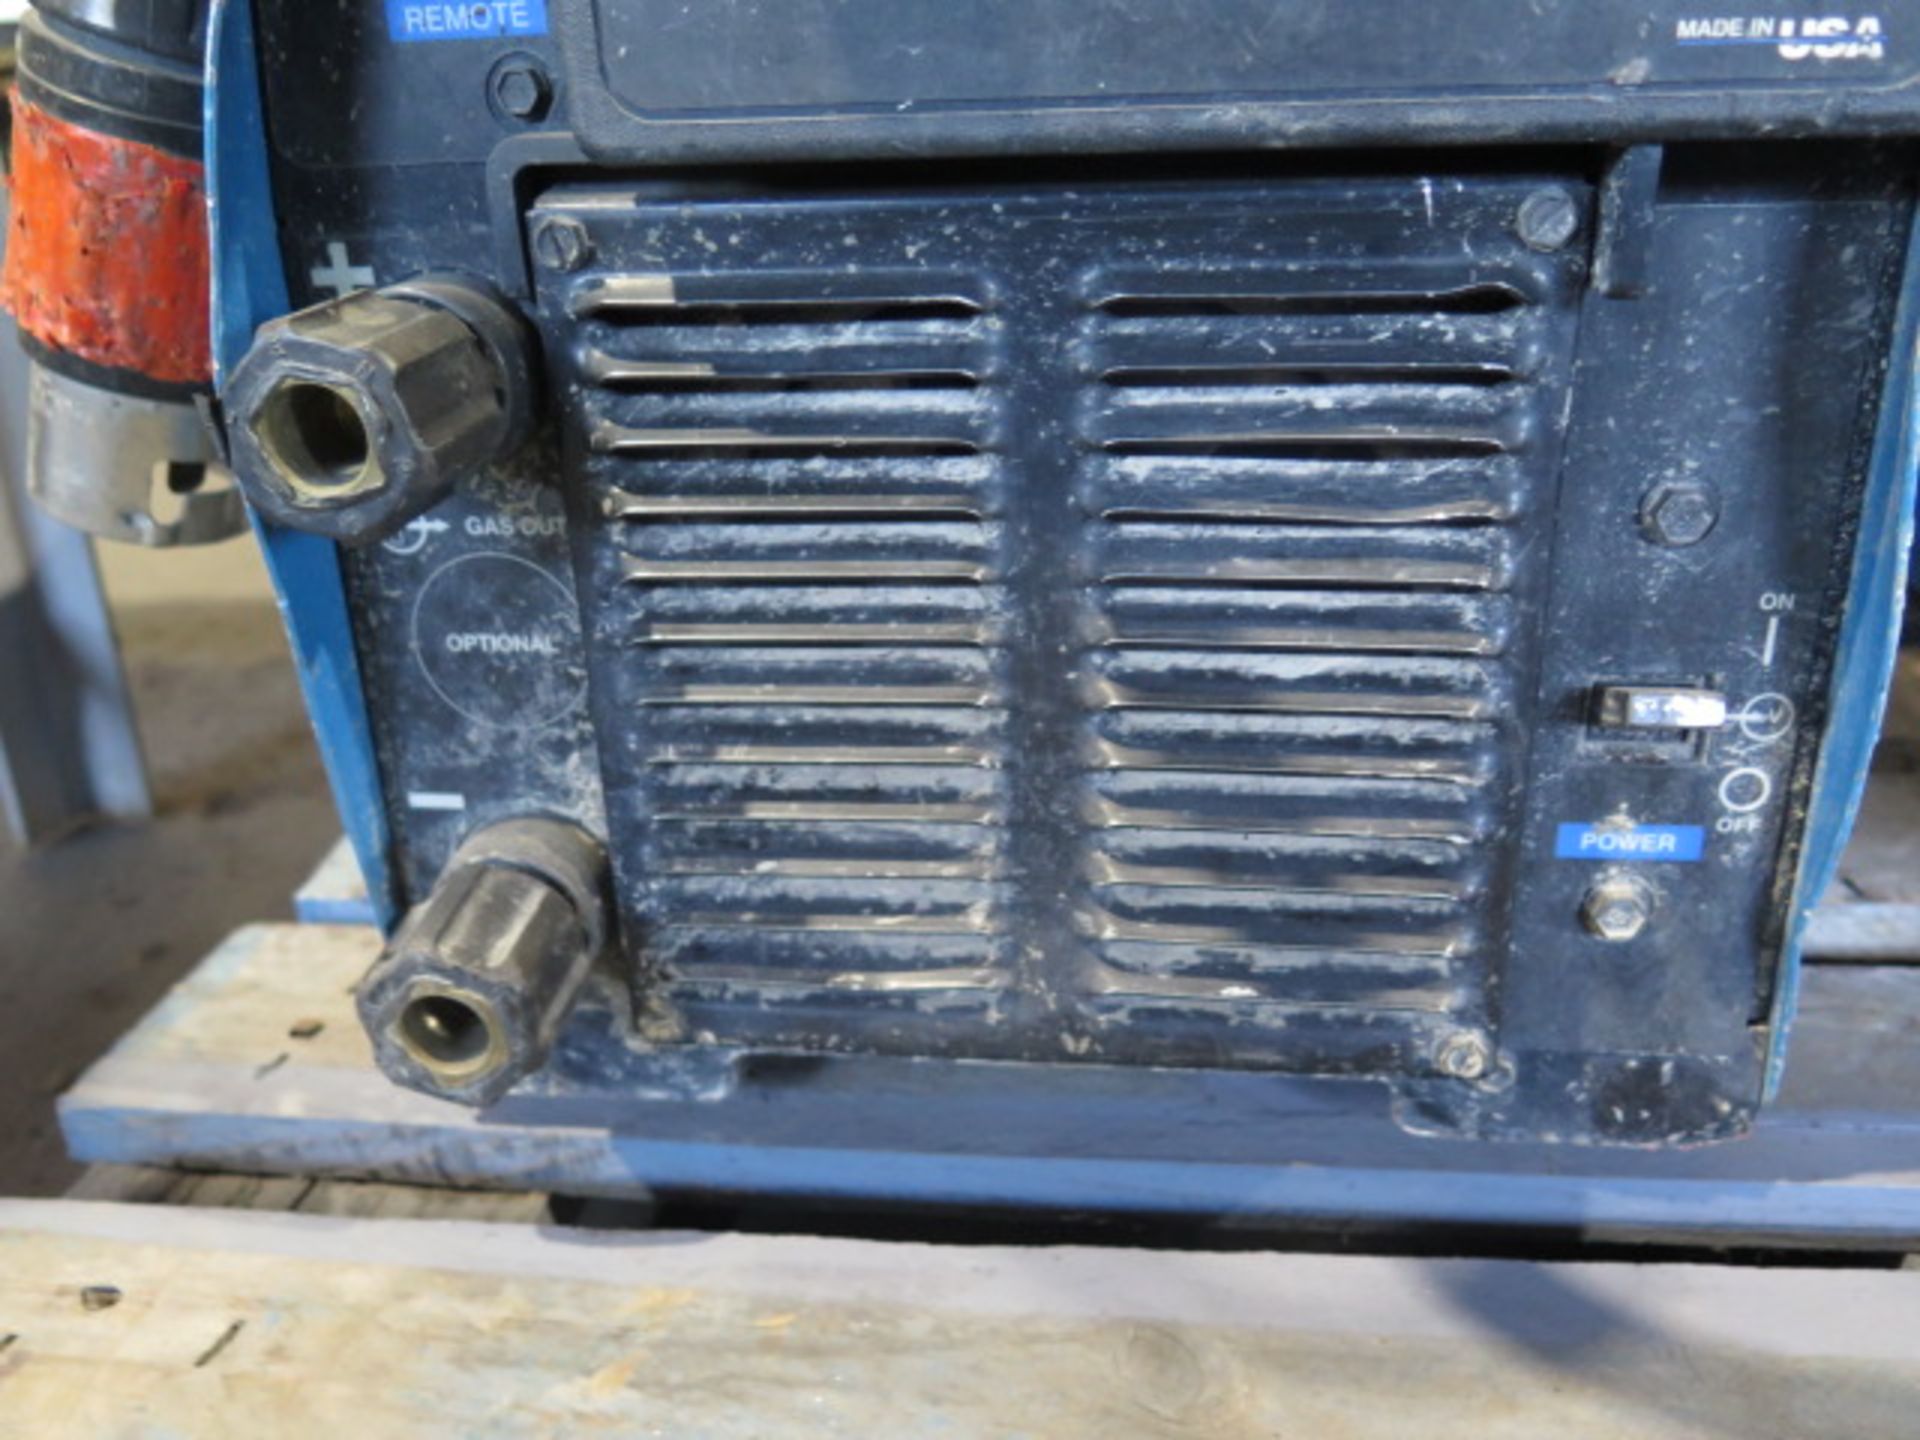 Miller XMT 350 CC/CV Arc Welding Power Source (NO CABLES) (SOLD AS-IS - NO WARRANTY) - Image 5 of 6